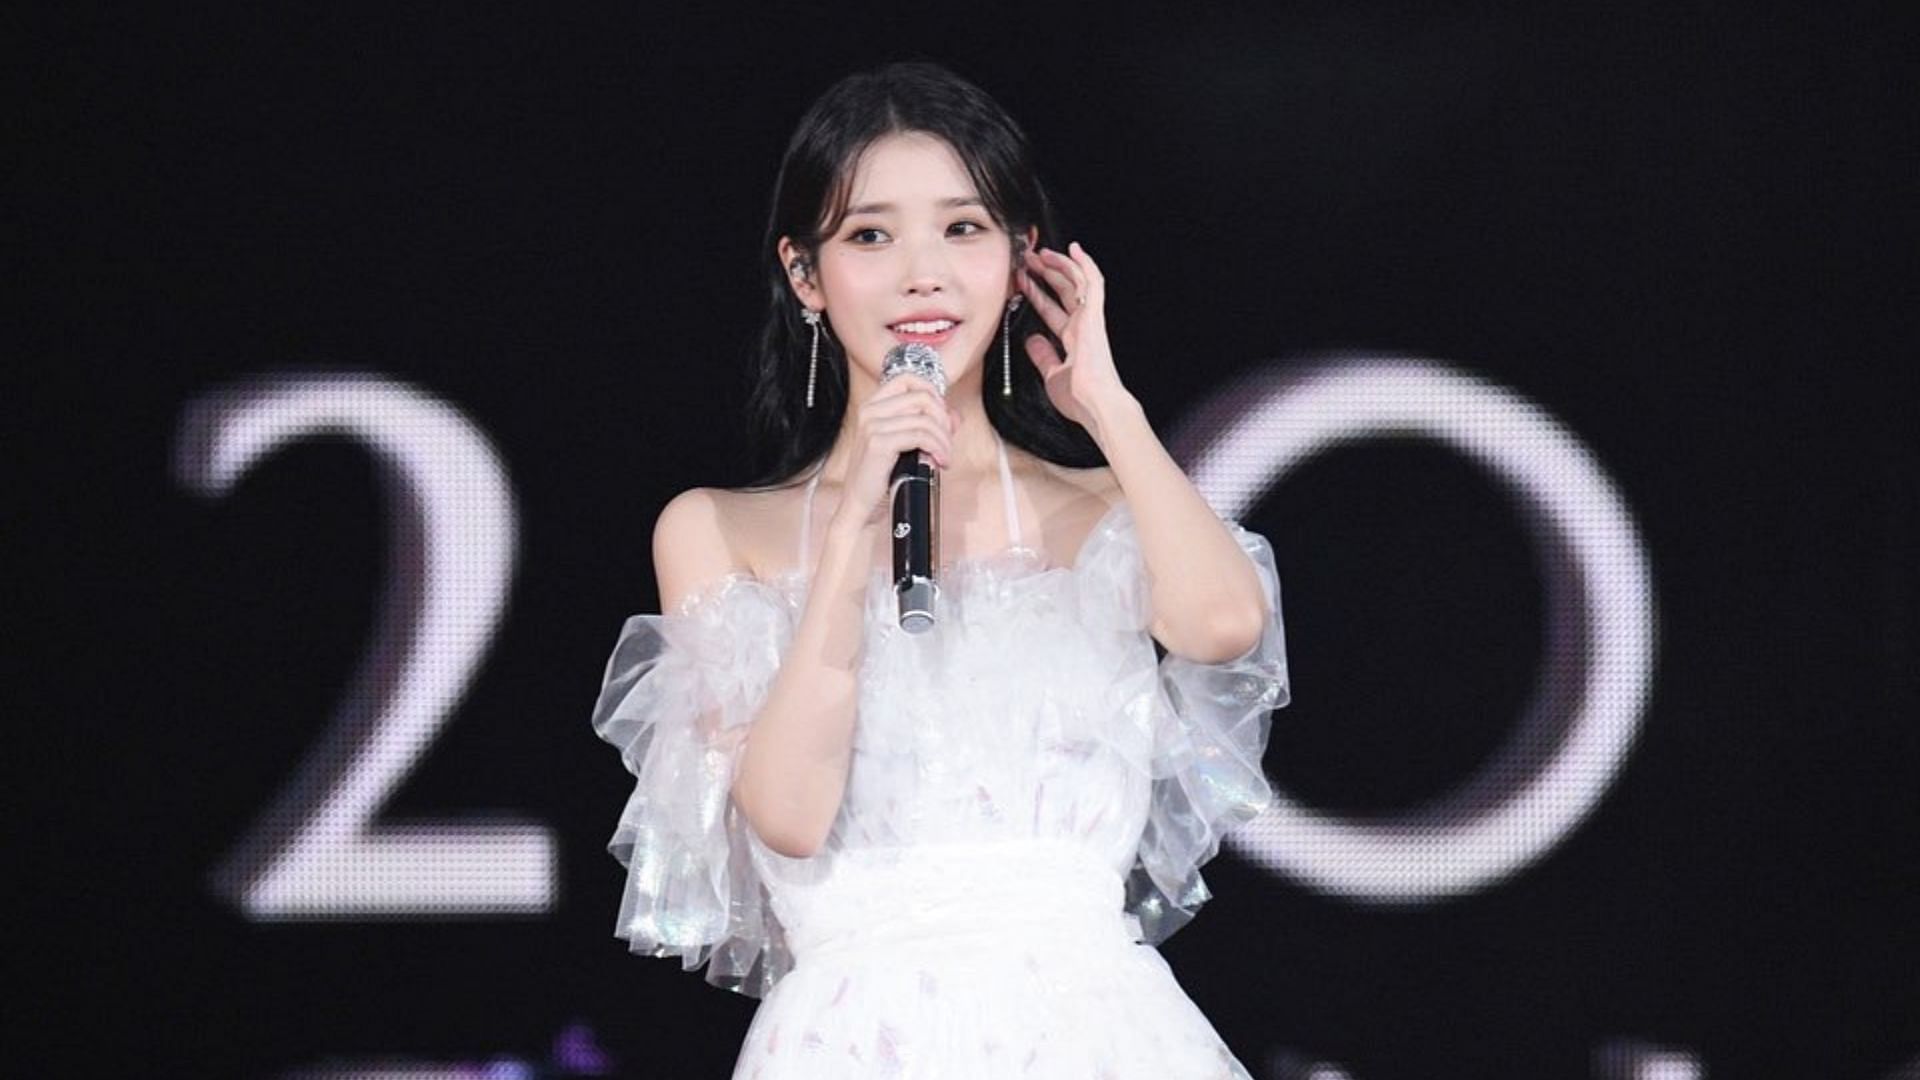 Dubbed the Queen of K-pop, IU has been undergoing treatment for a hearing disorder for nearly a year (Images via Instagram/dlwlrma)